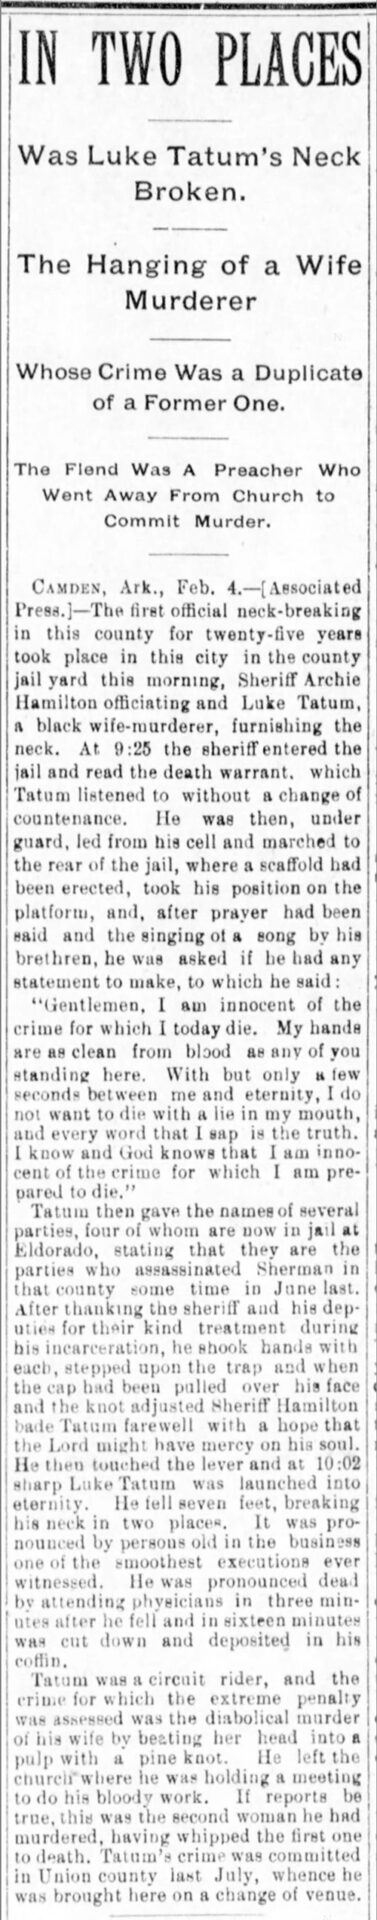 "In Two Places Was Luke Tatum's Neck Broken" newspaper clipping